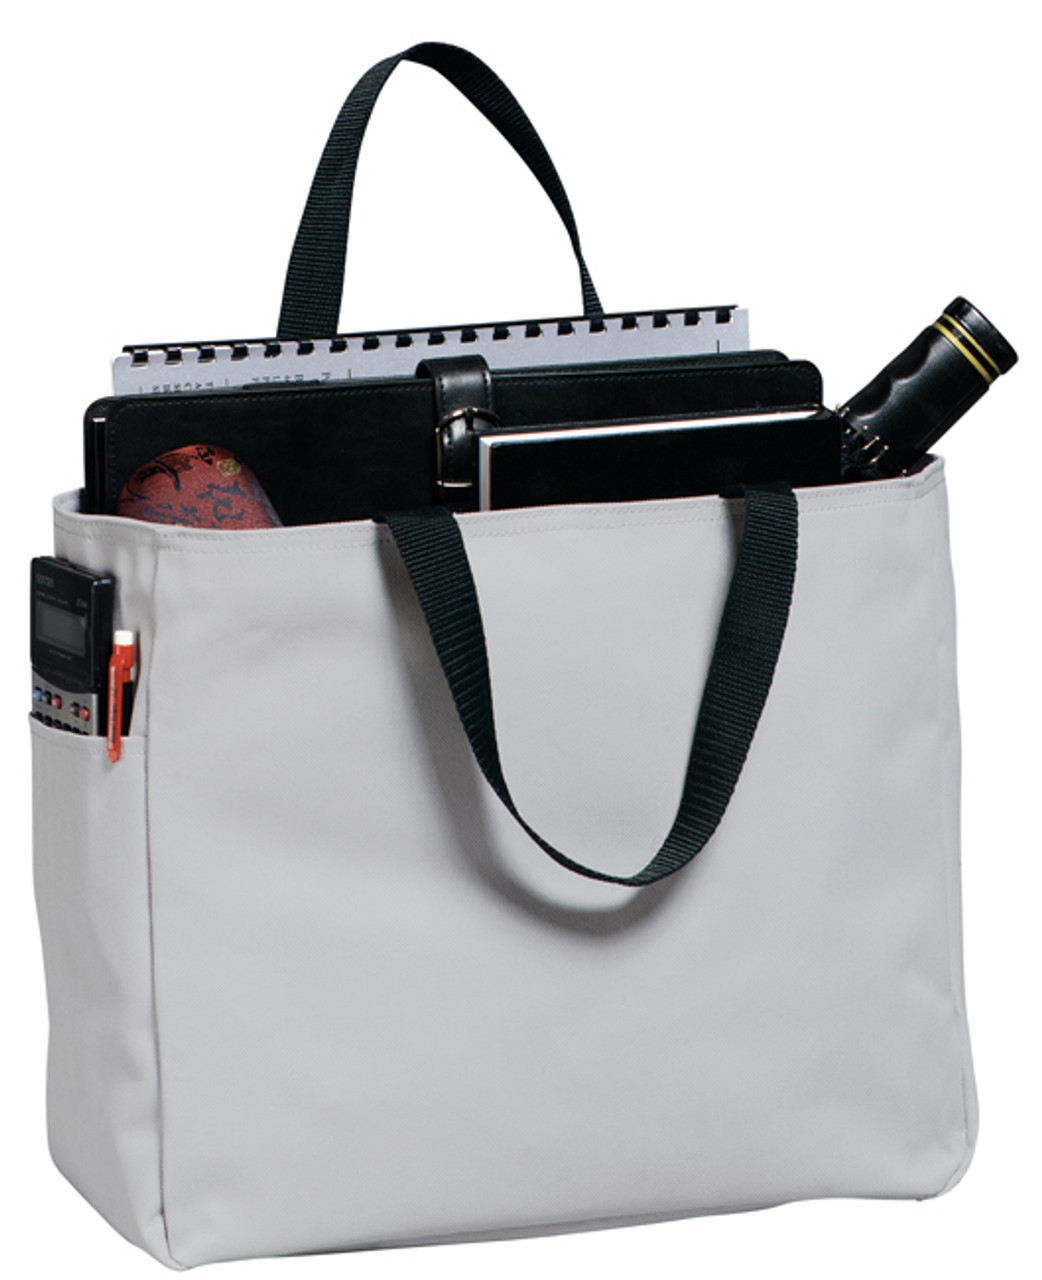 Personalized Essential Canvas Tote Bag